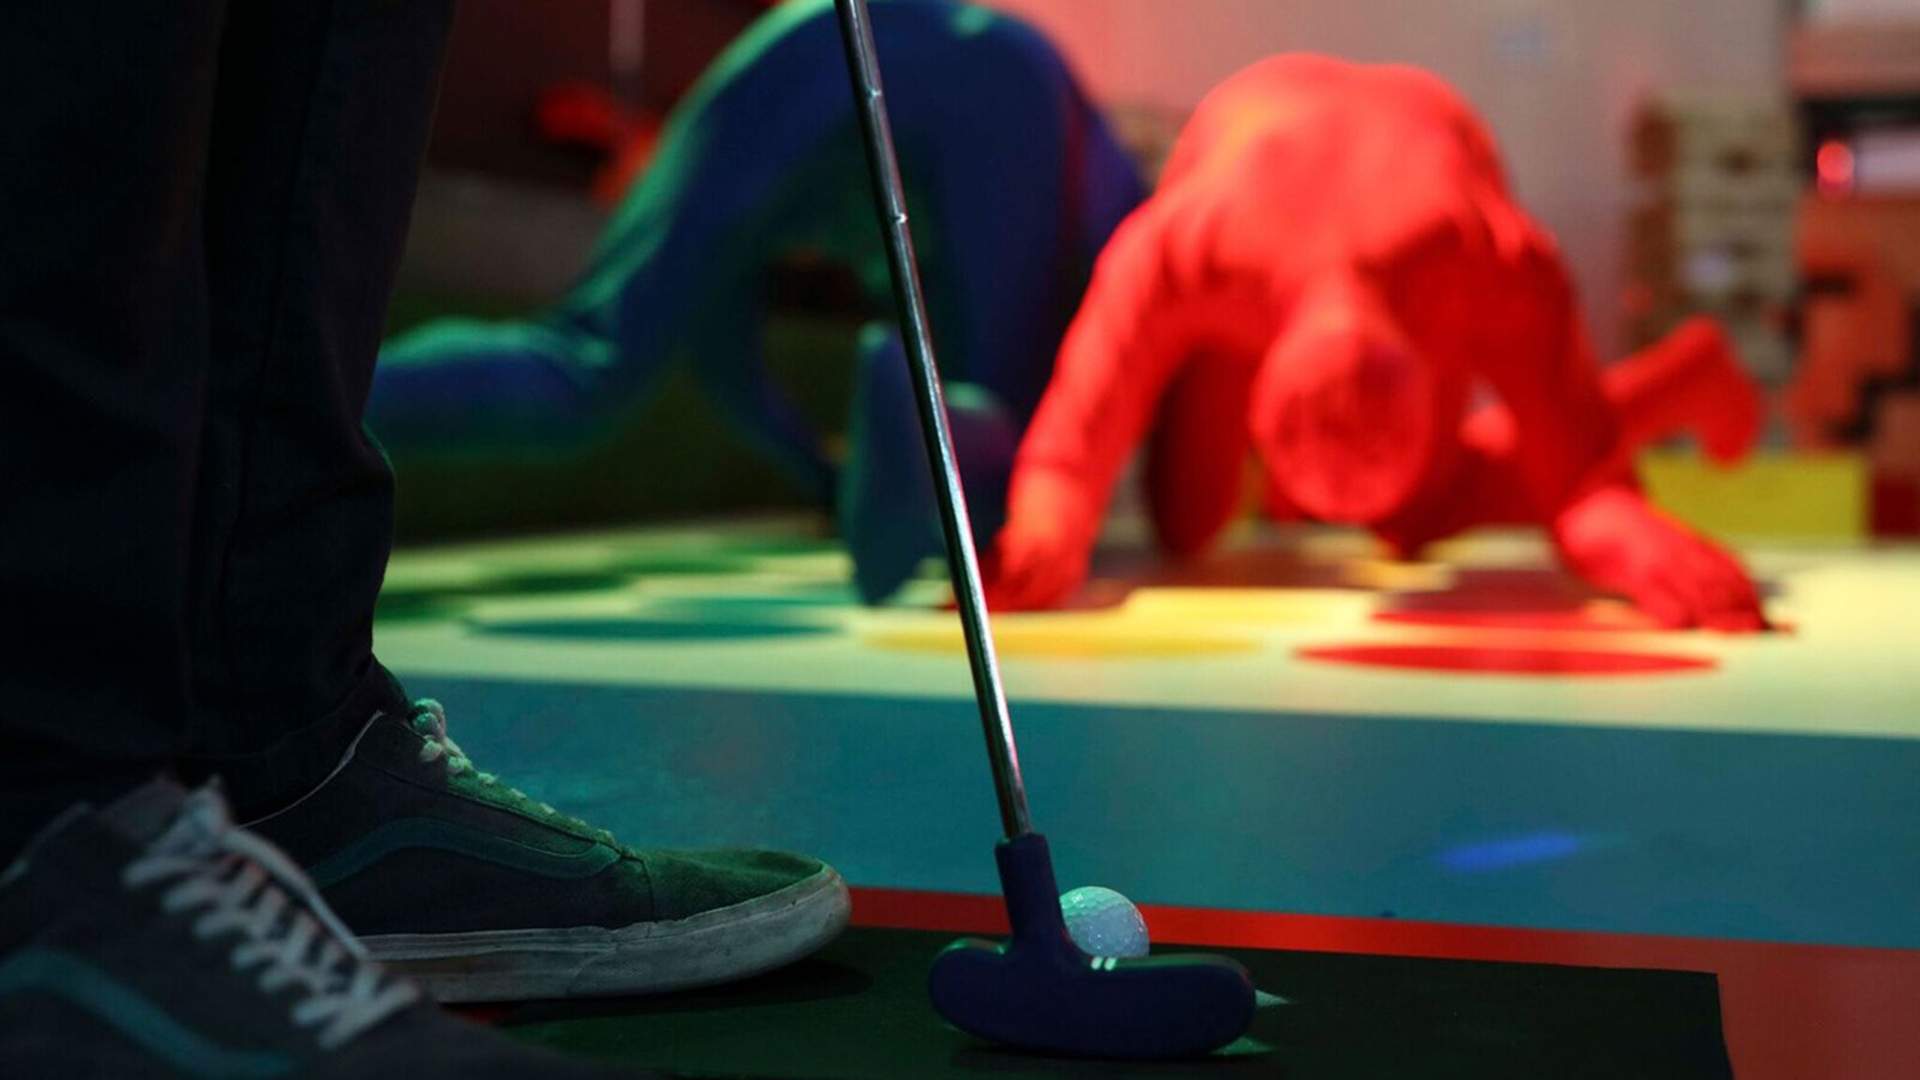 Brisbane's Insane Mini-Golf Bar Holey Moley Is Coming to Melbourne